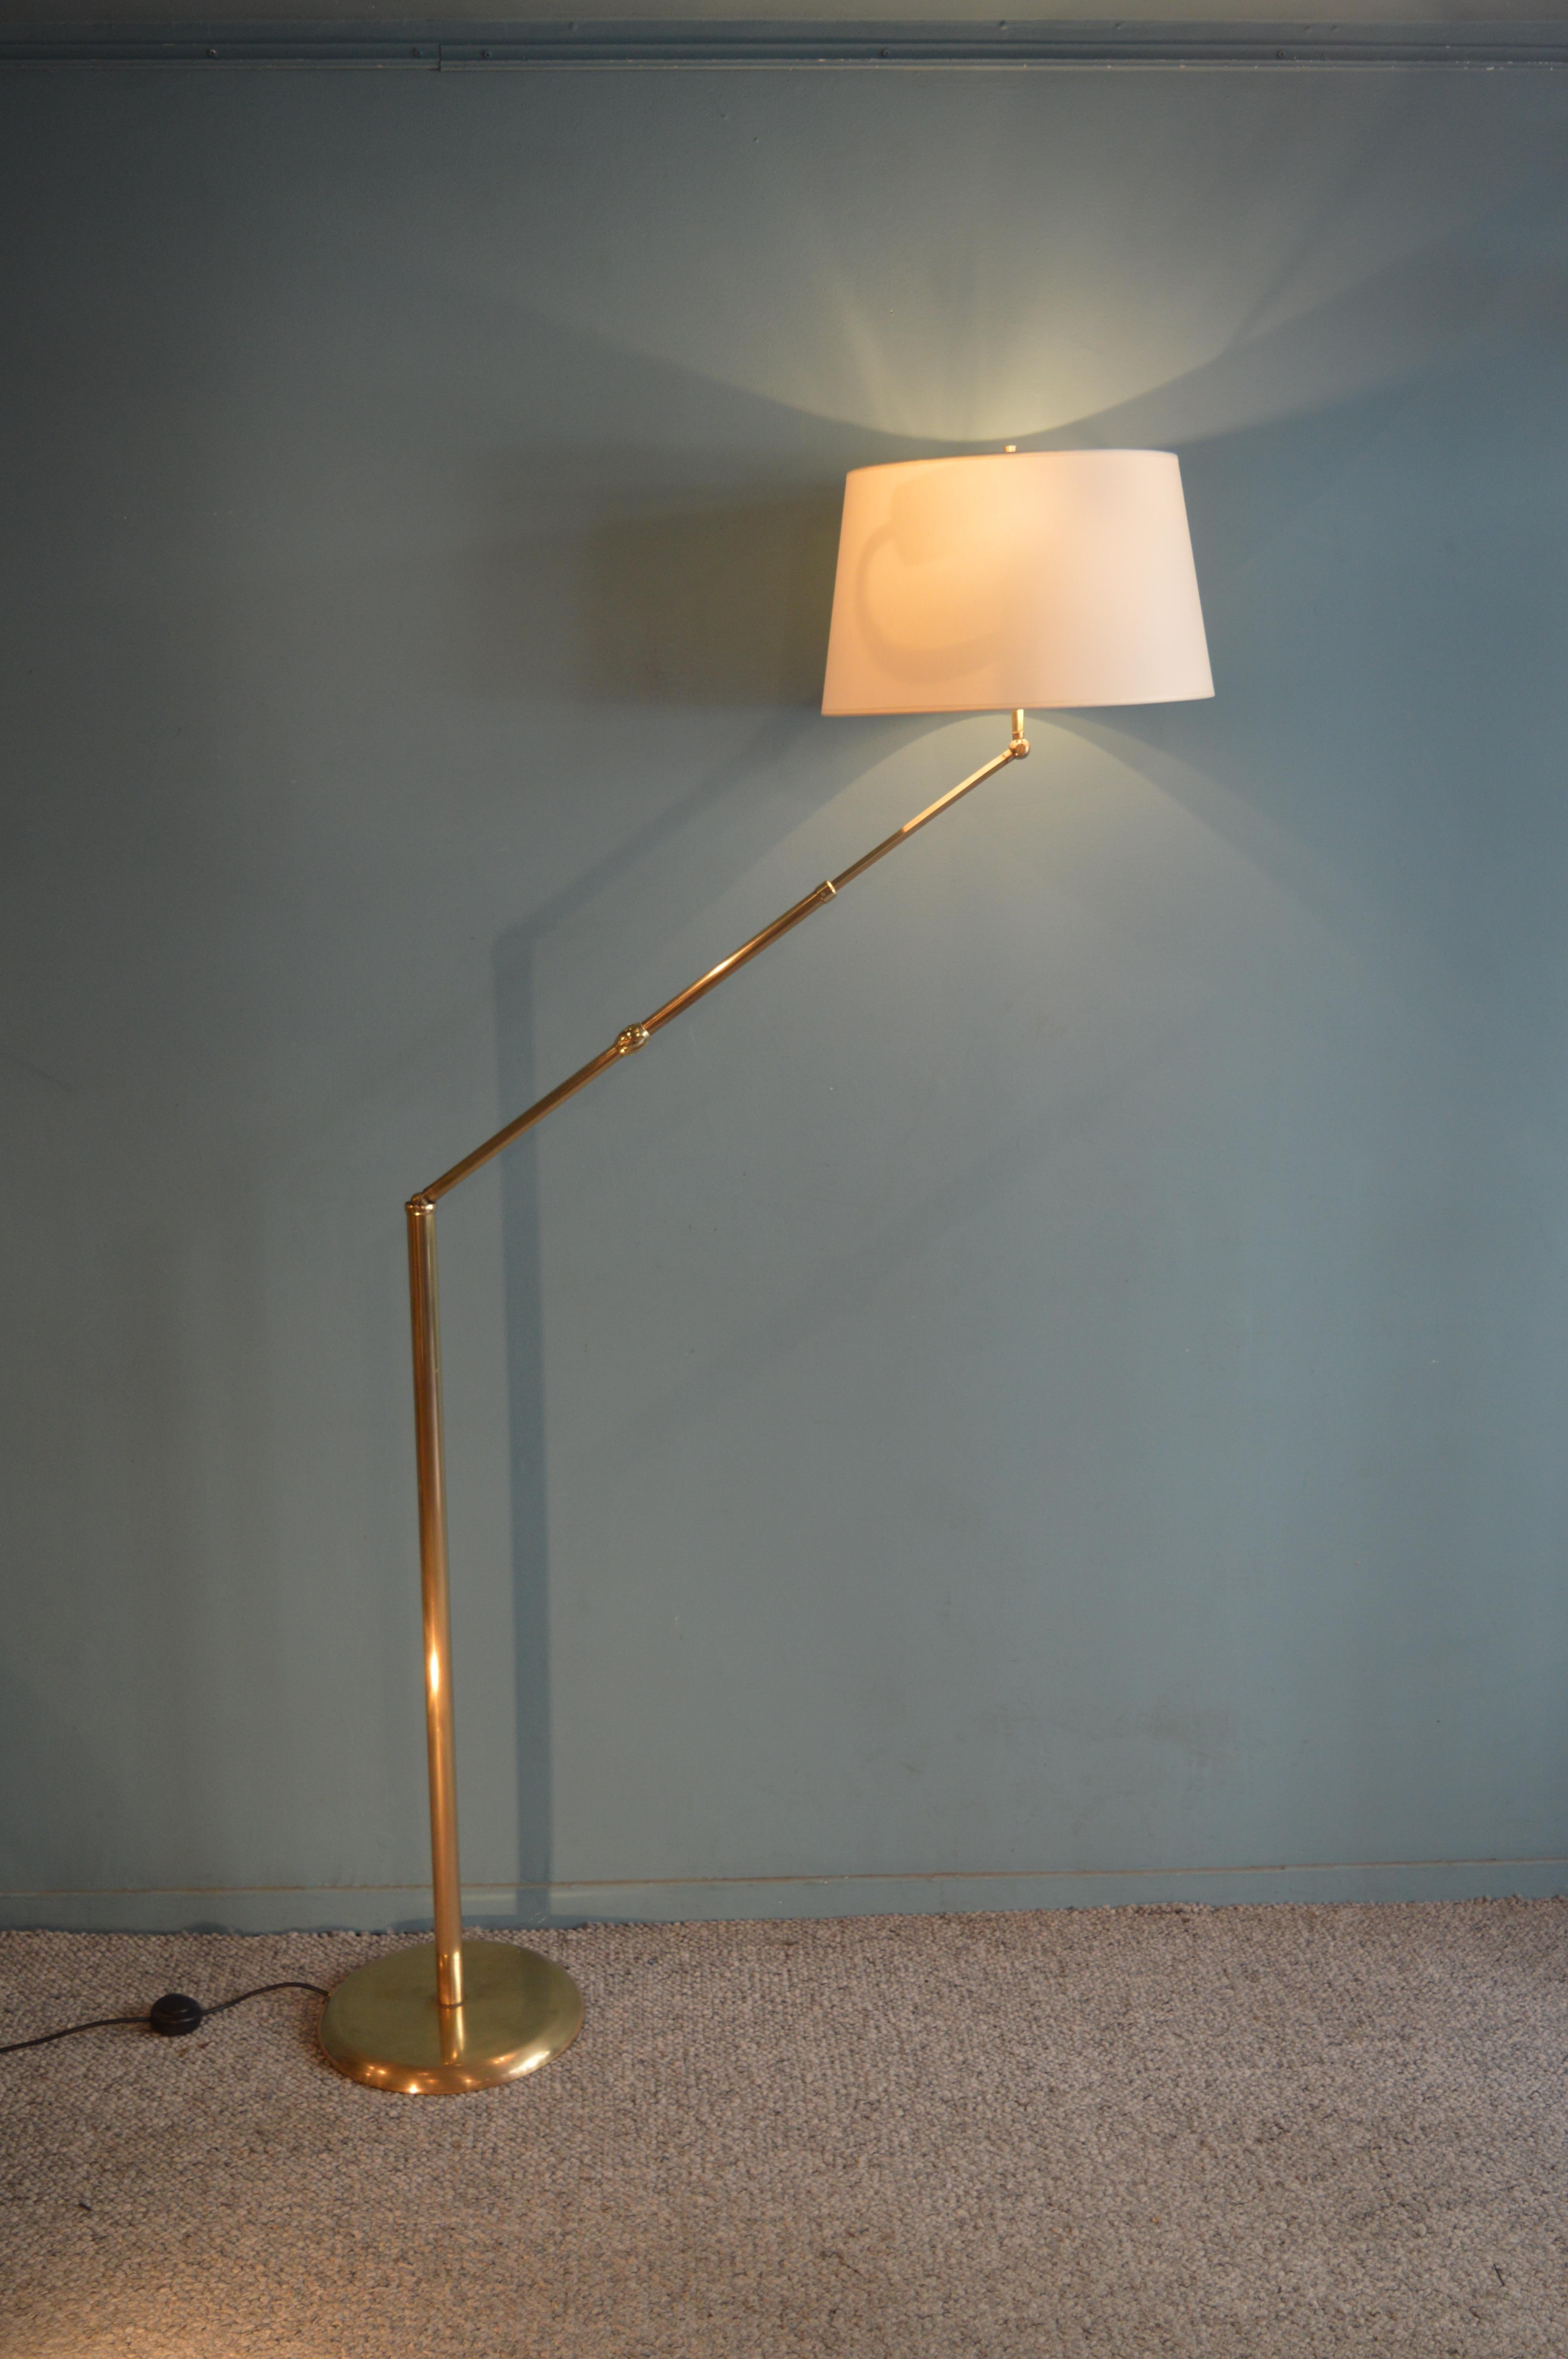 Adjustable floor lamp in brass by Angelo Lelli, circa 1960.
Italian work, circa 1960.
Of a very high quality, this floor lamp is telescopic and have two patellas so you can move it in many differents positions.
Monogram 